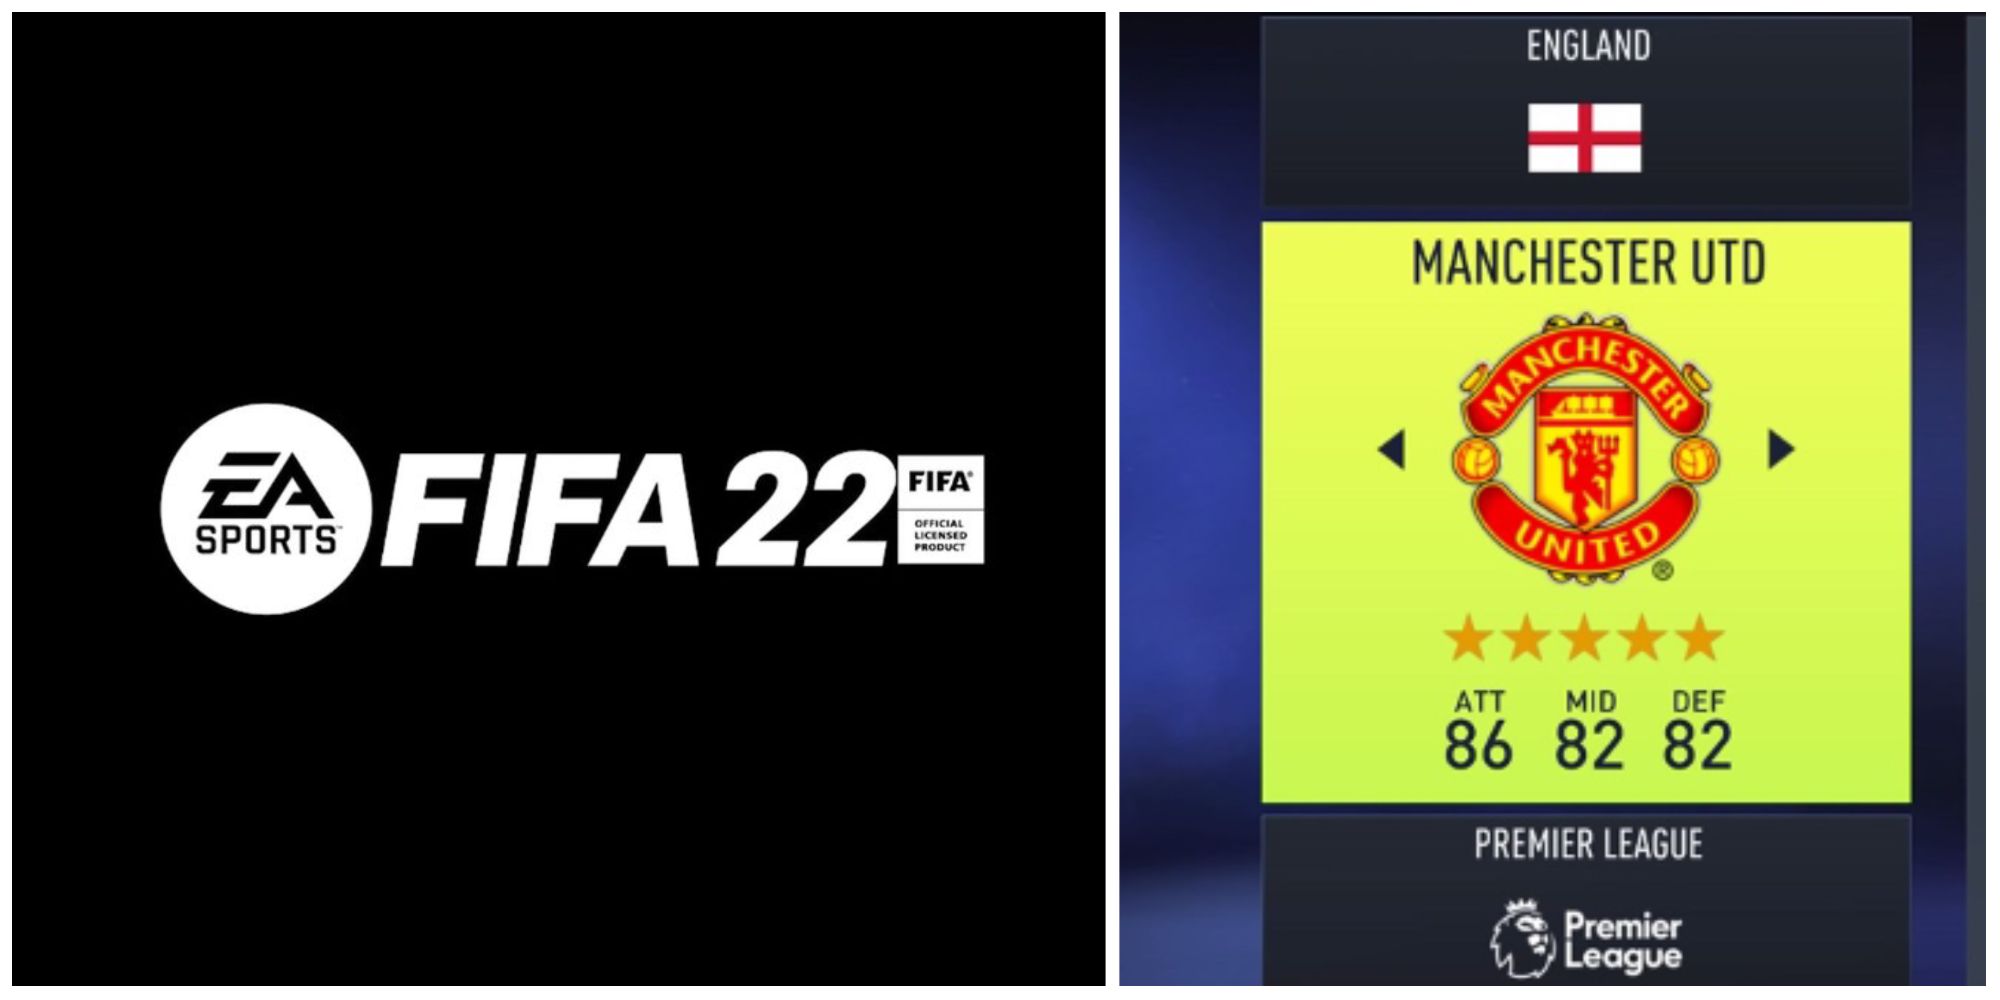 Fifa 22 Manchester United feature image